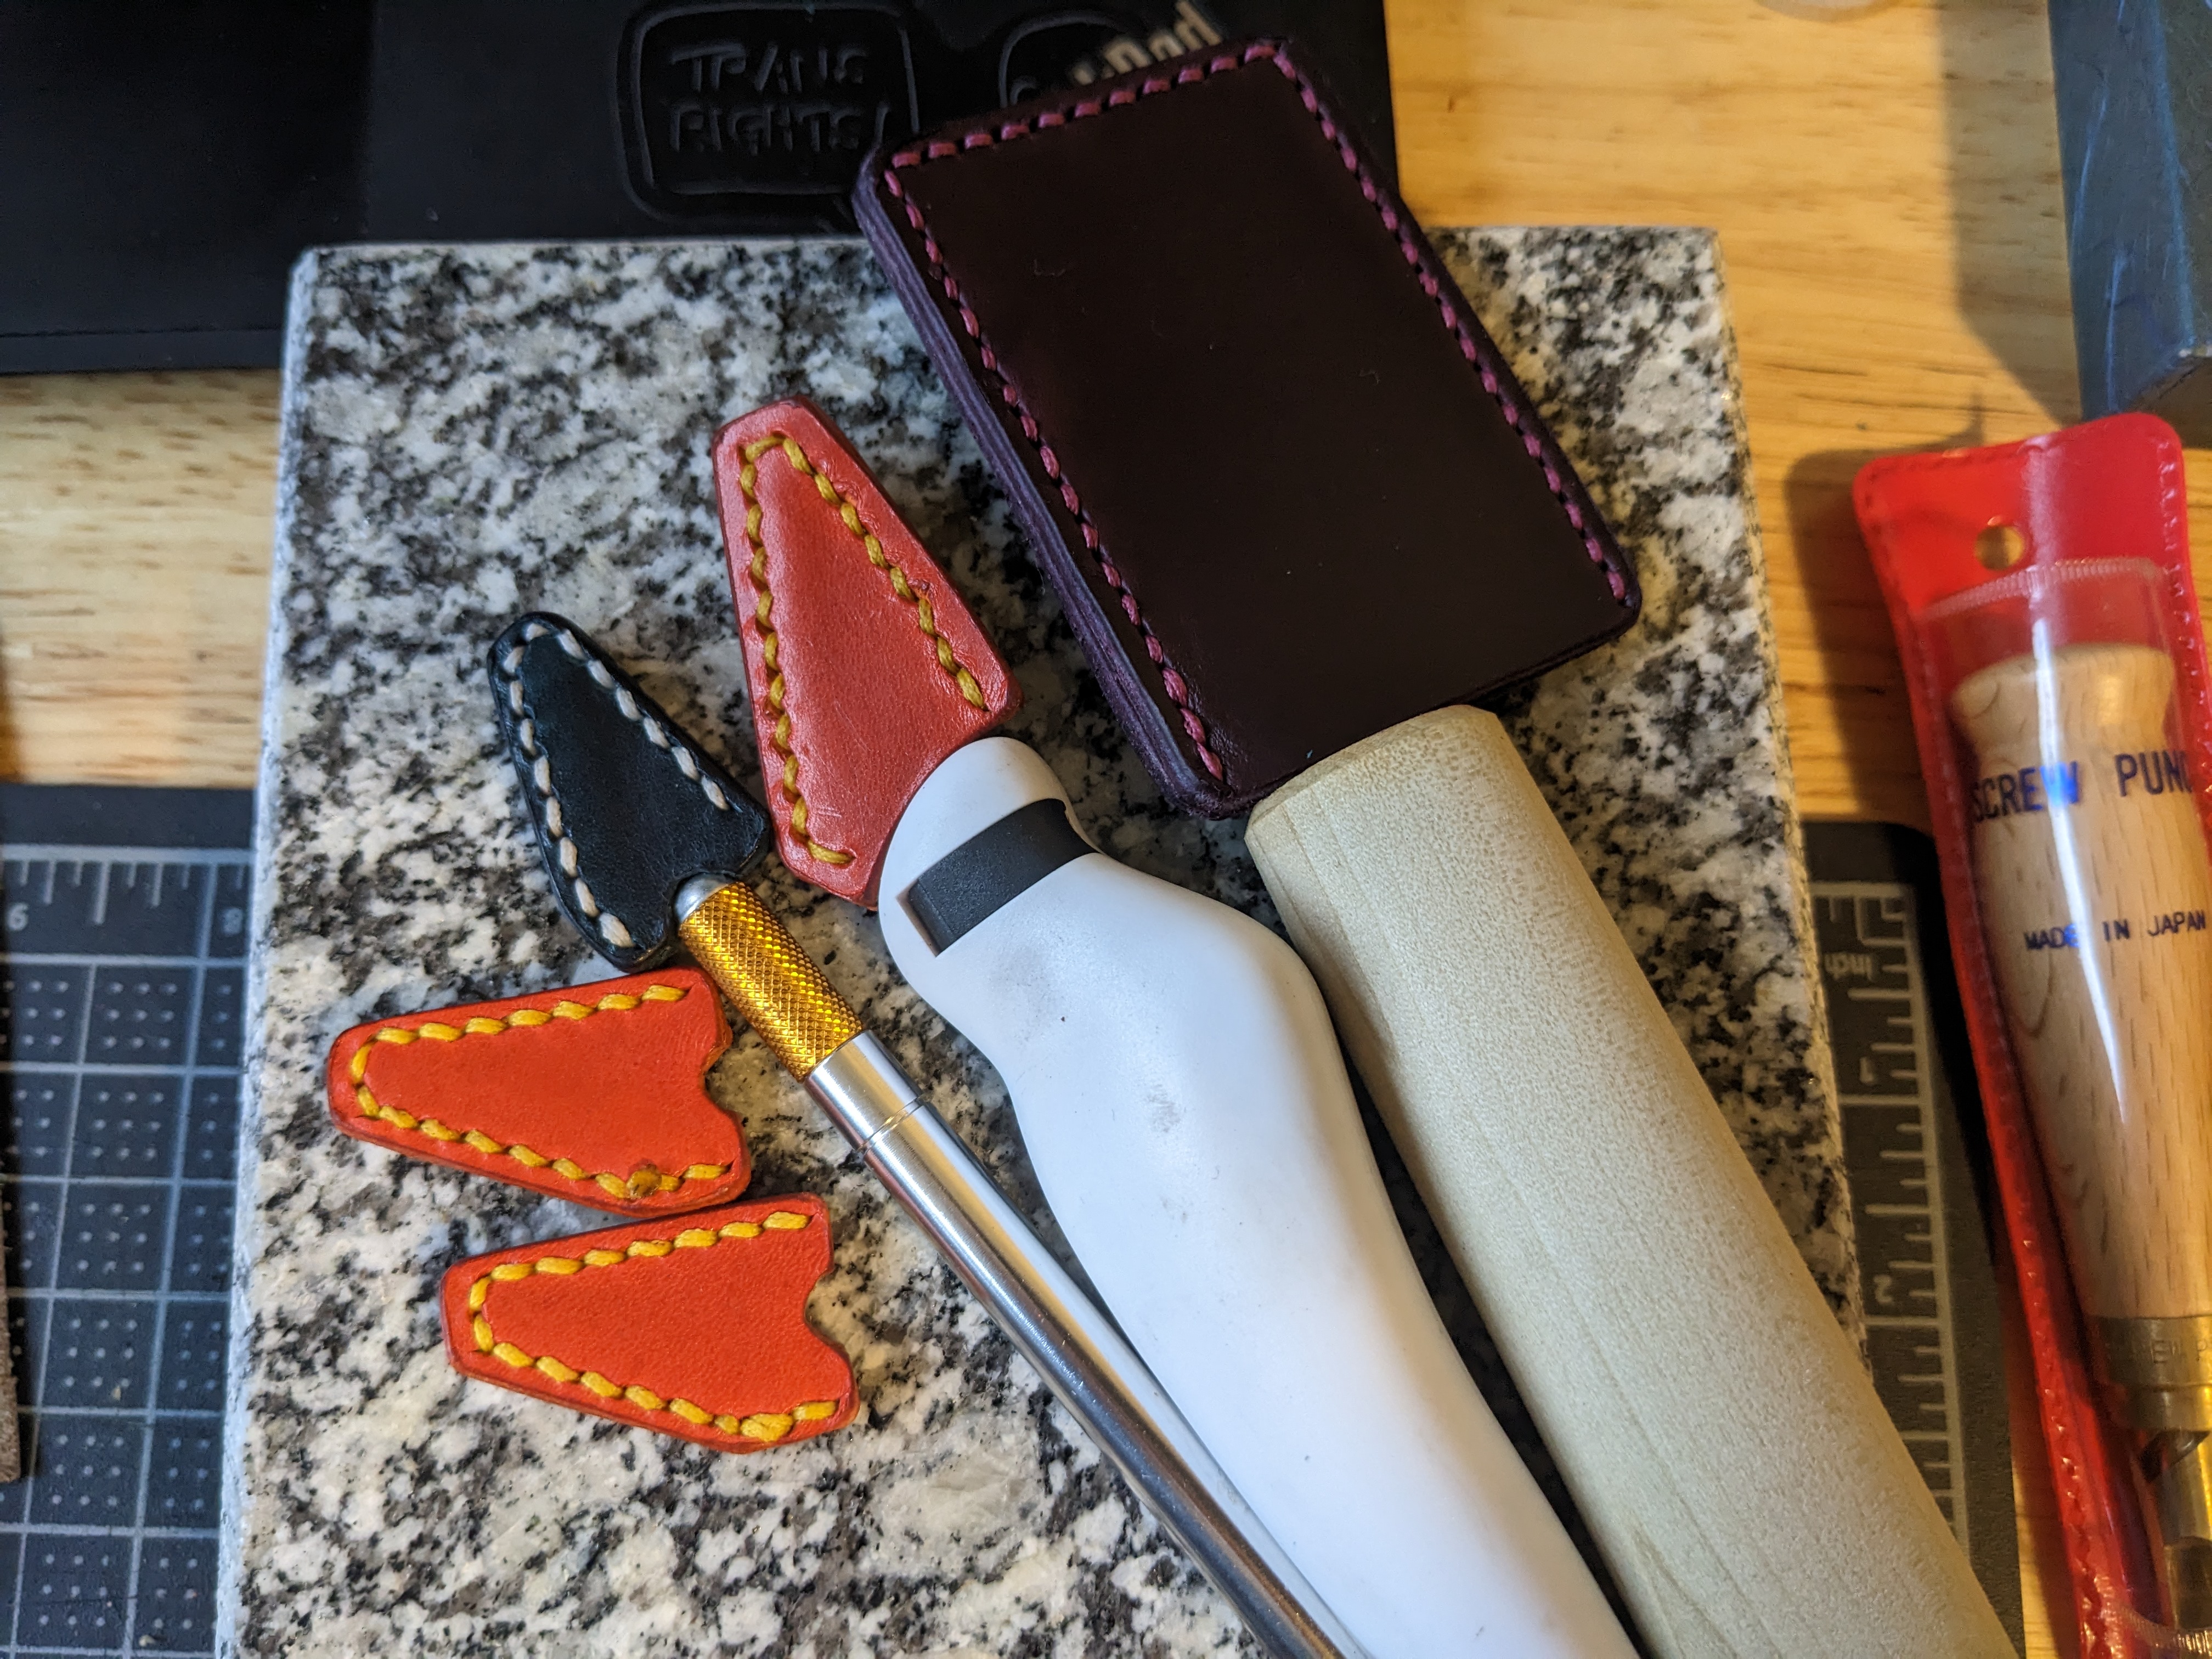 Several blades with leather sheaths, and a few extra sheaths. There's a #2 blade with an orange sheath with yellow stitching, a #11 blade with a blue sheath with light grey stitching, and a skiving knife with a plum sheath and pink stitching.